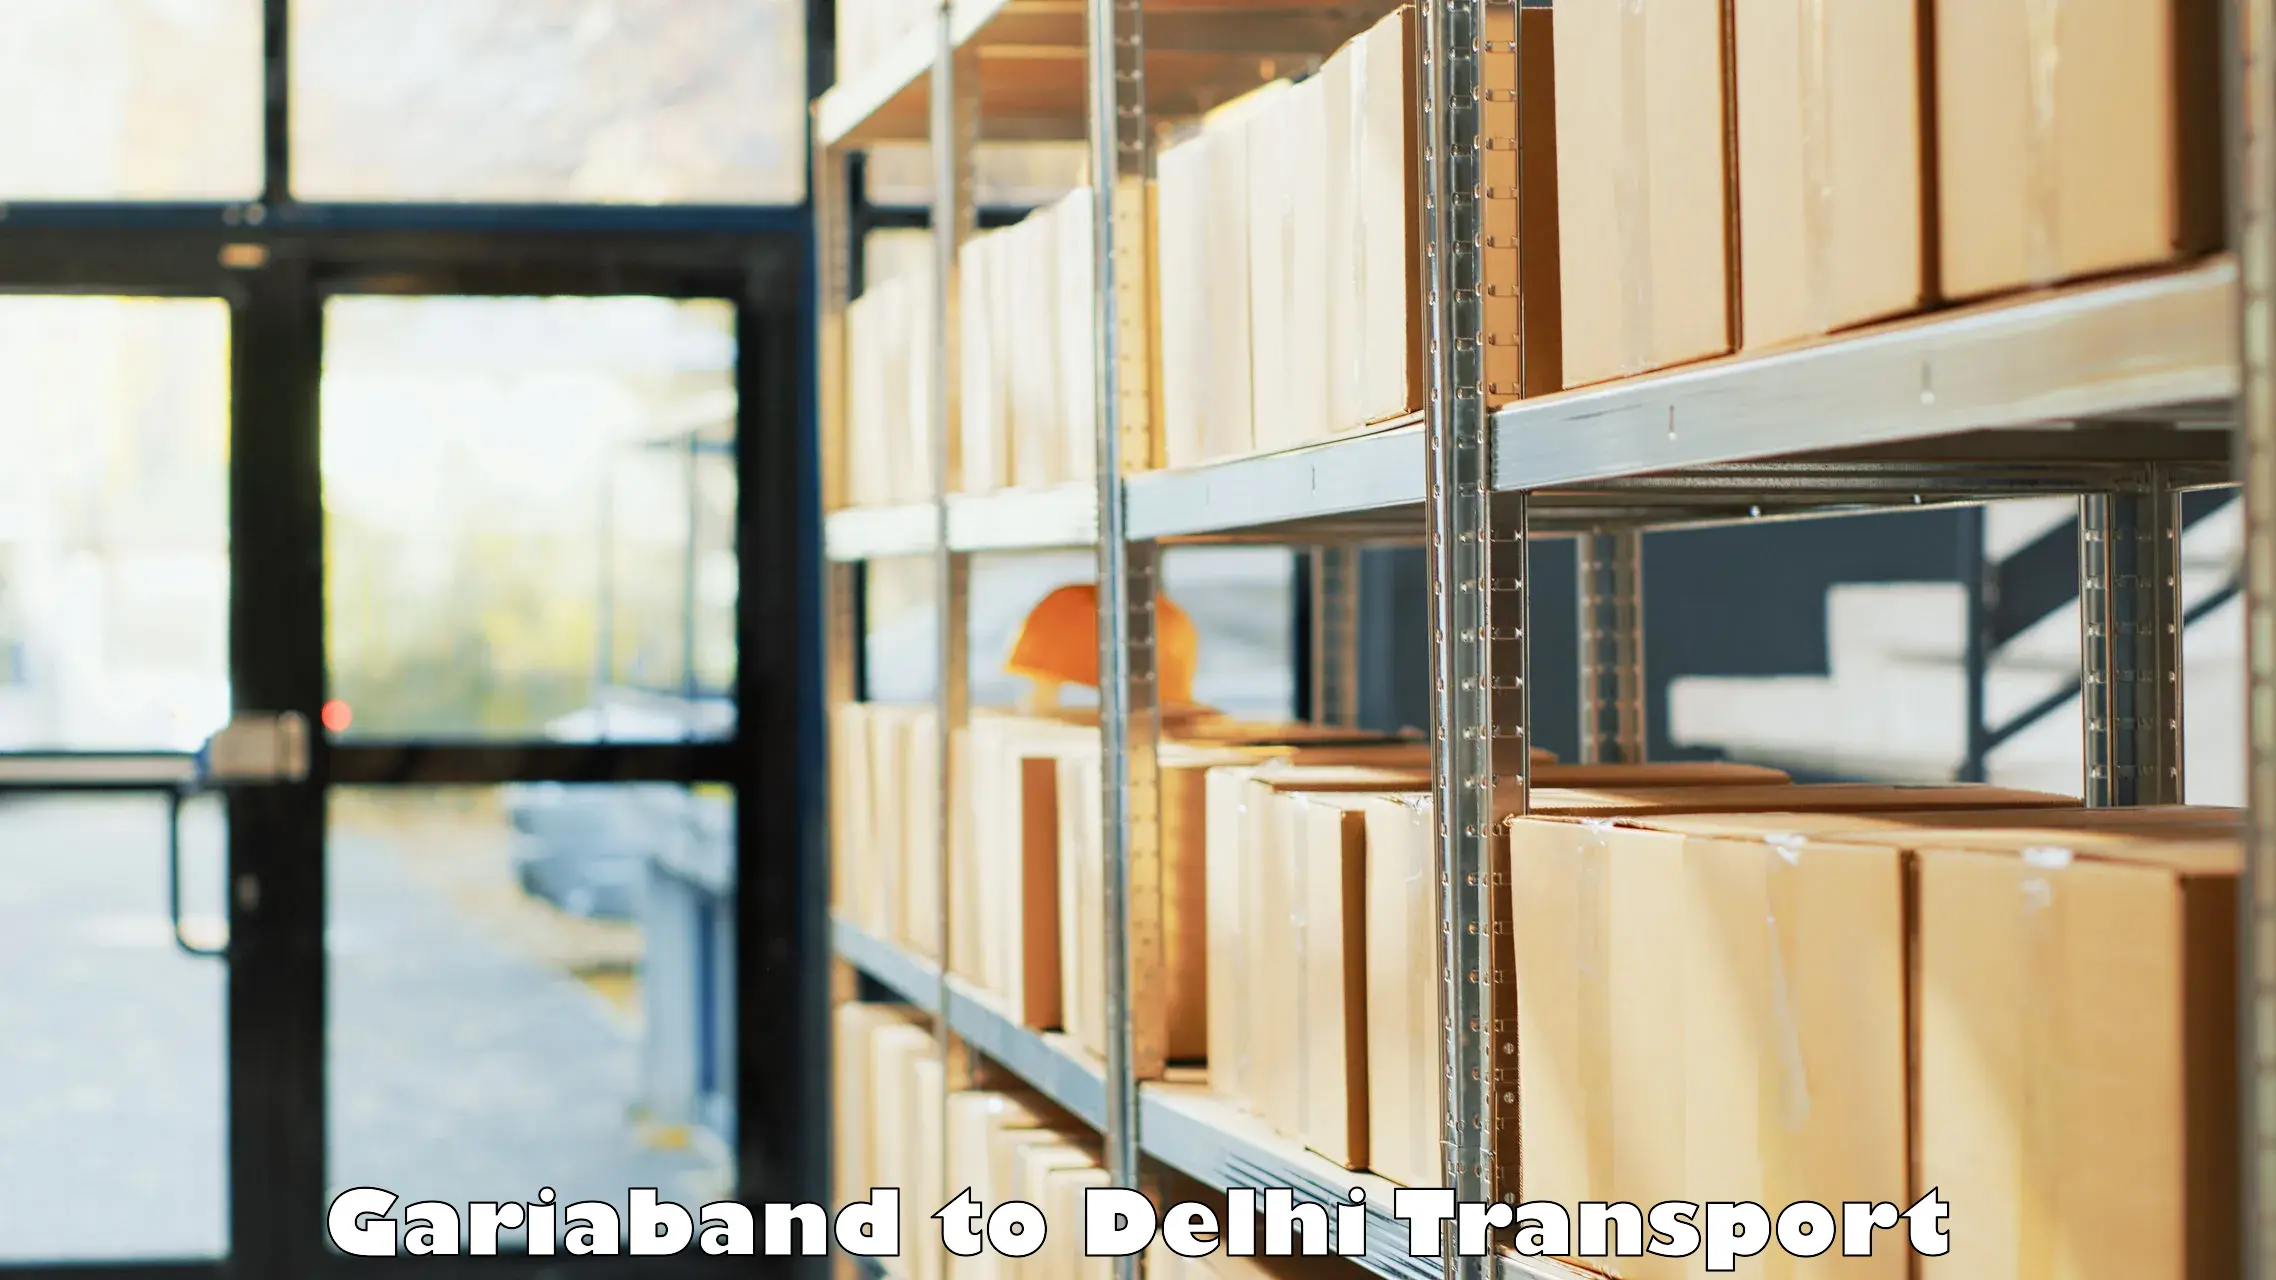 Lorry transport service Gariaband to East Delhi